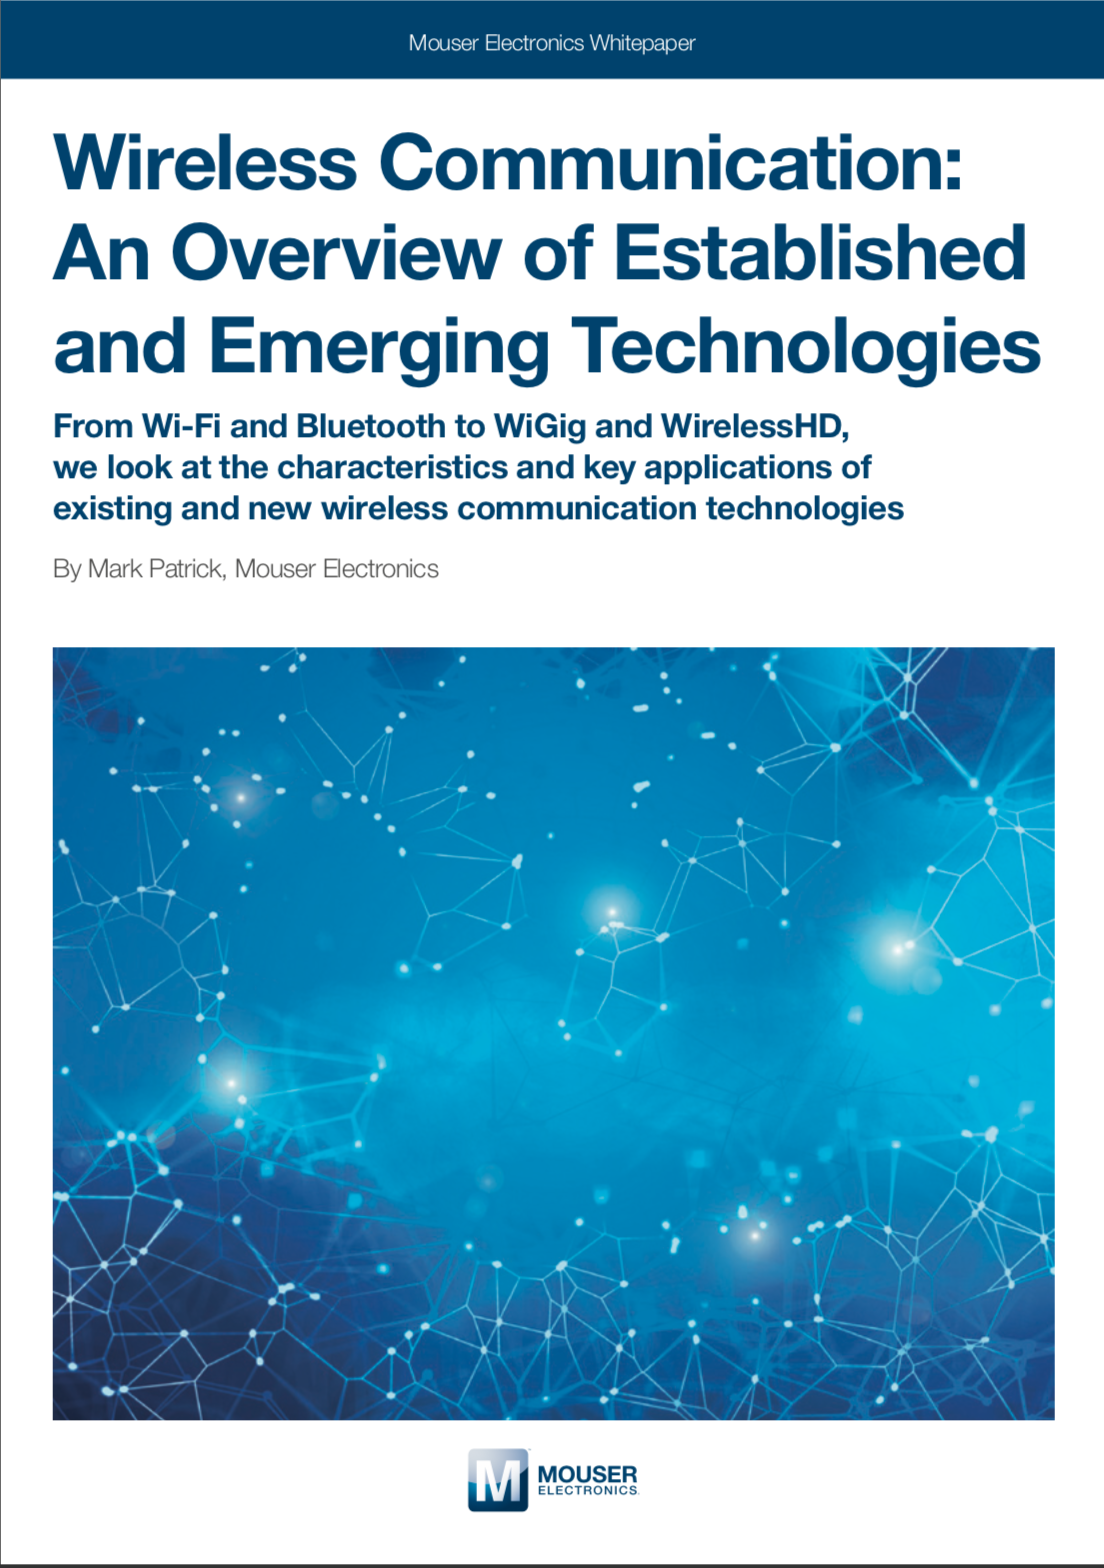 Wireless Communication: An Overview of Established and Emerging Technologies